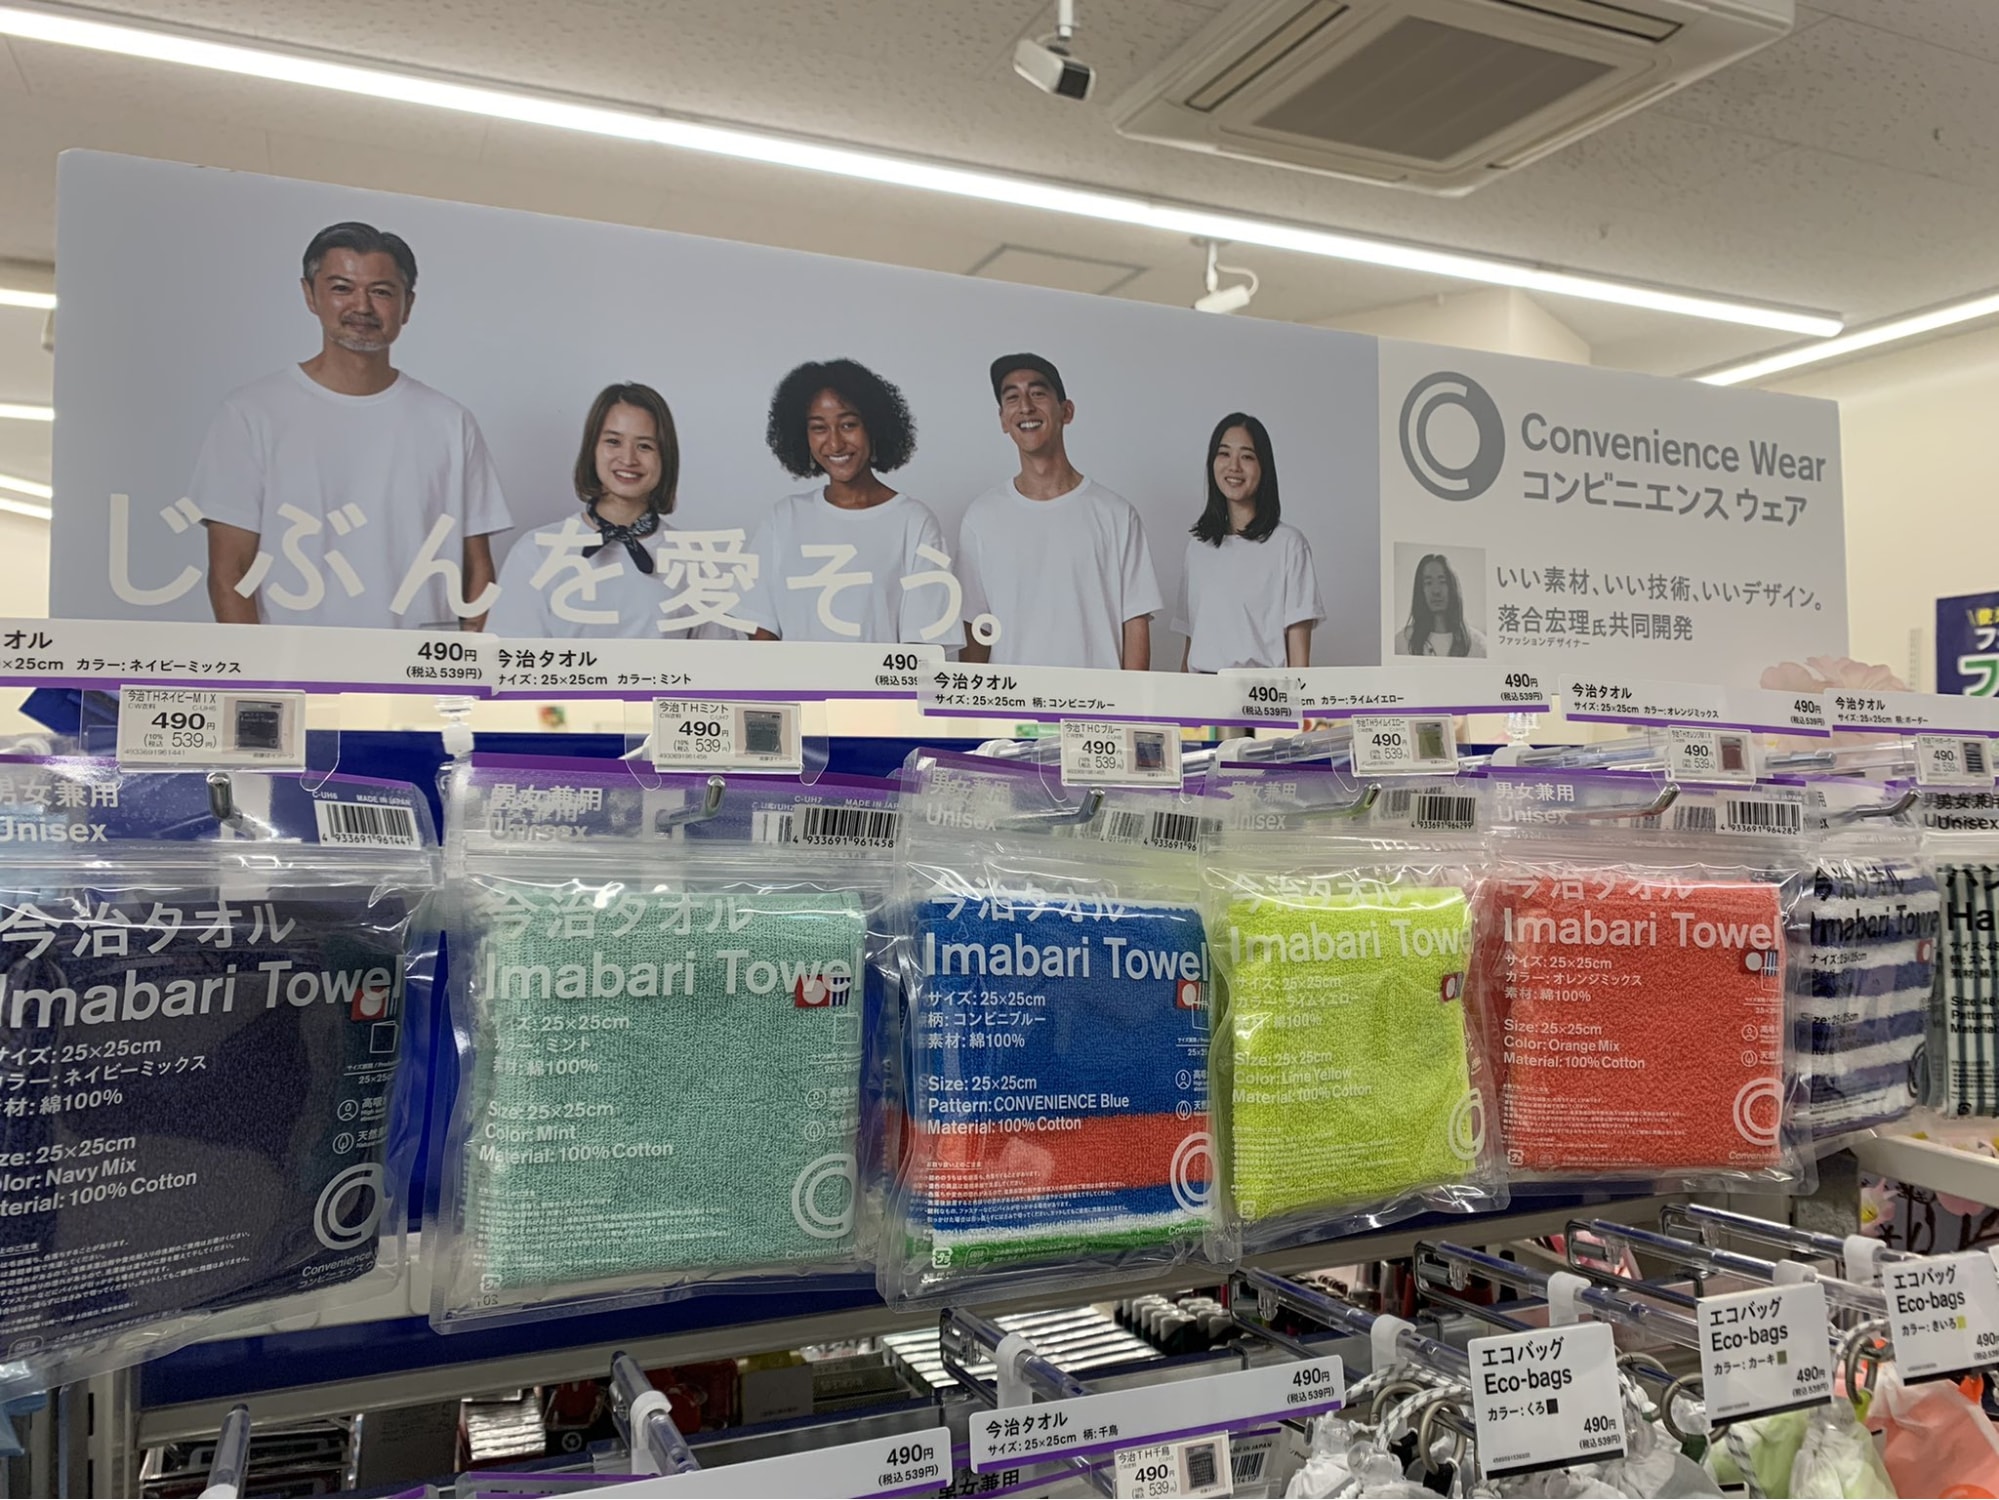 FamilyMart Convenience Wear - In-store poster with shirts piled